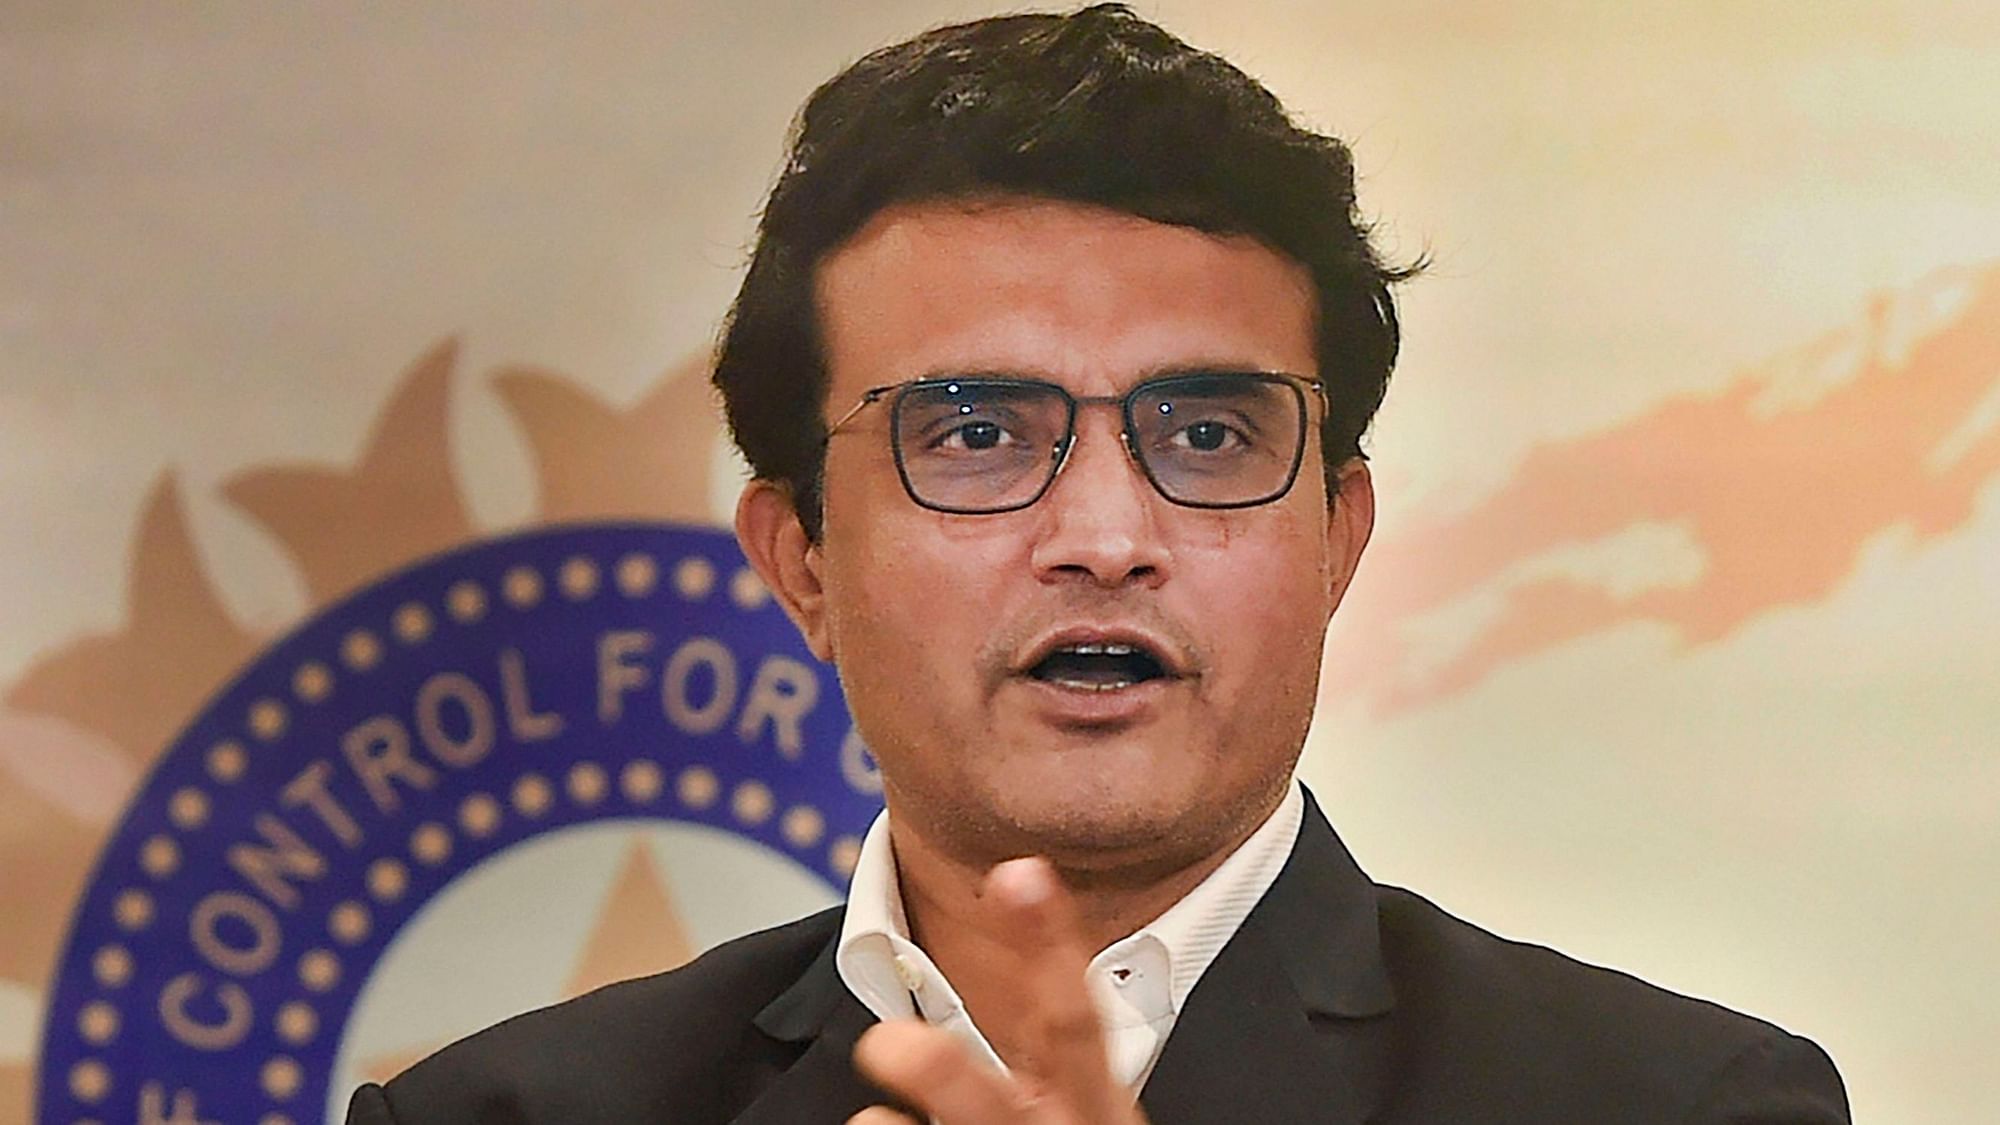 Sourav Ganguly said Day-Night Test is the start of something special in Indian cricket.